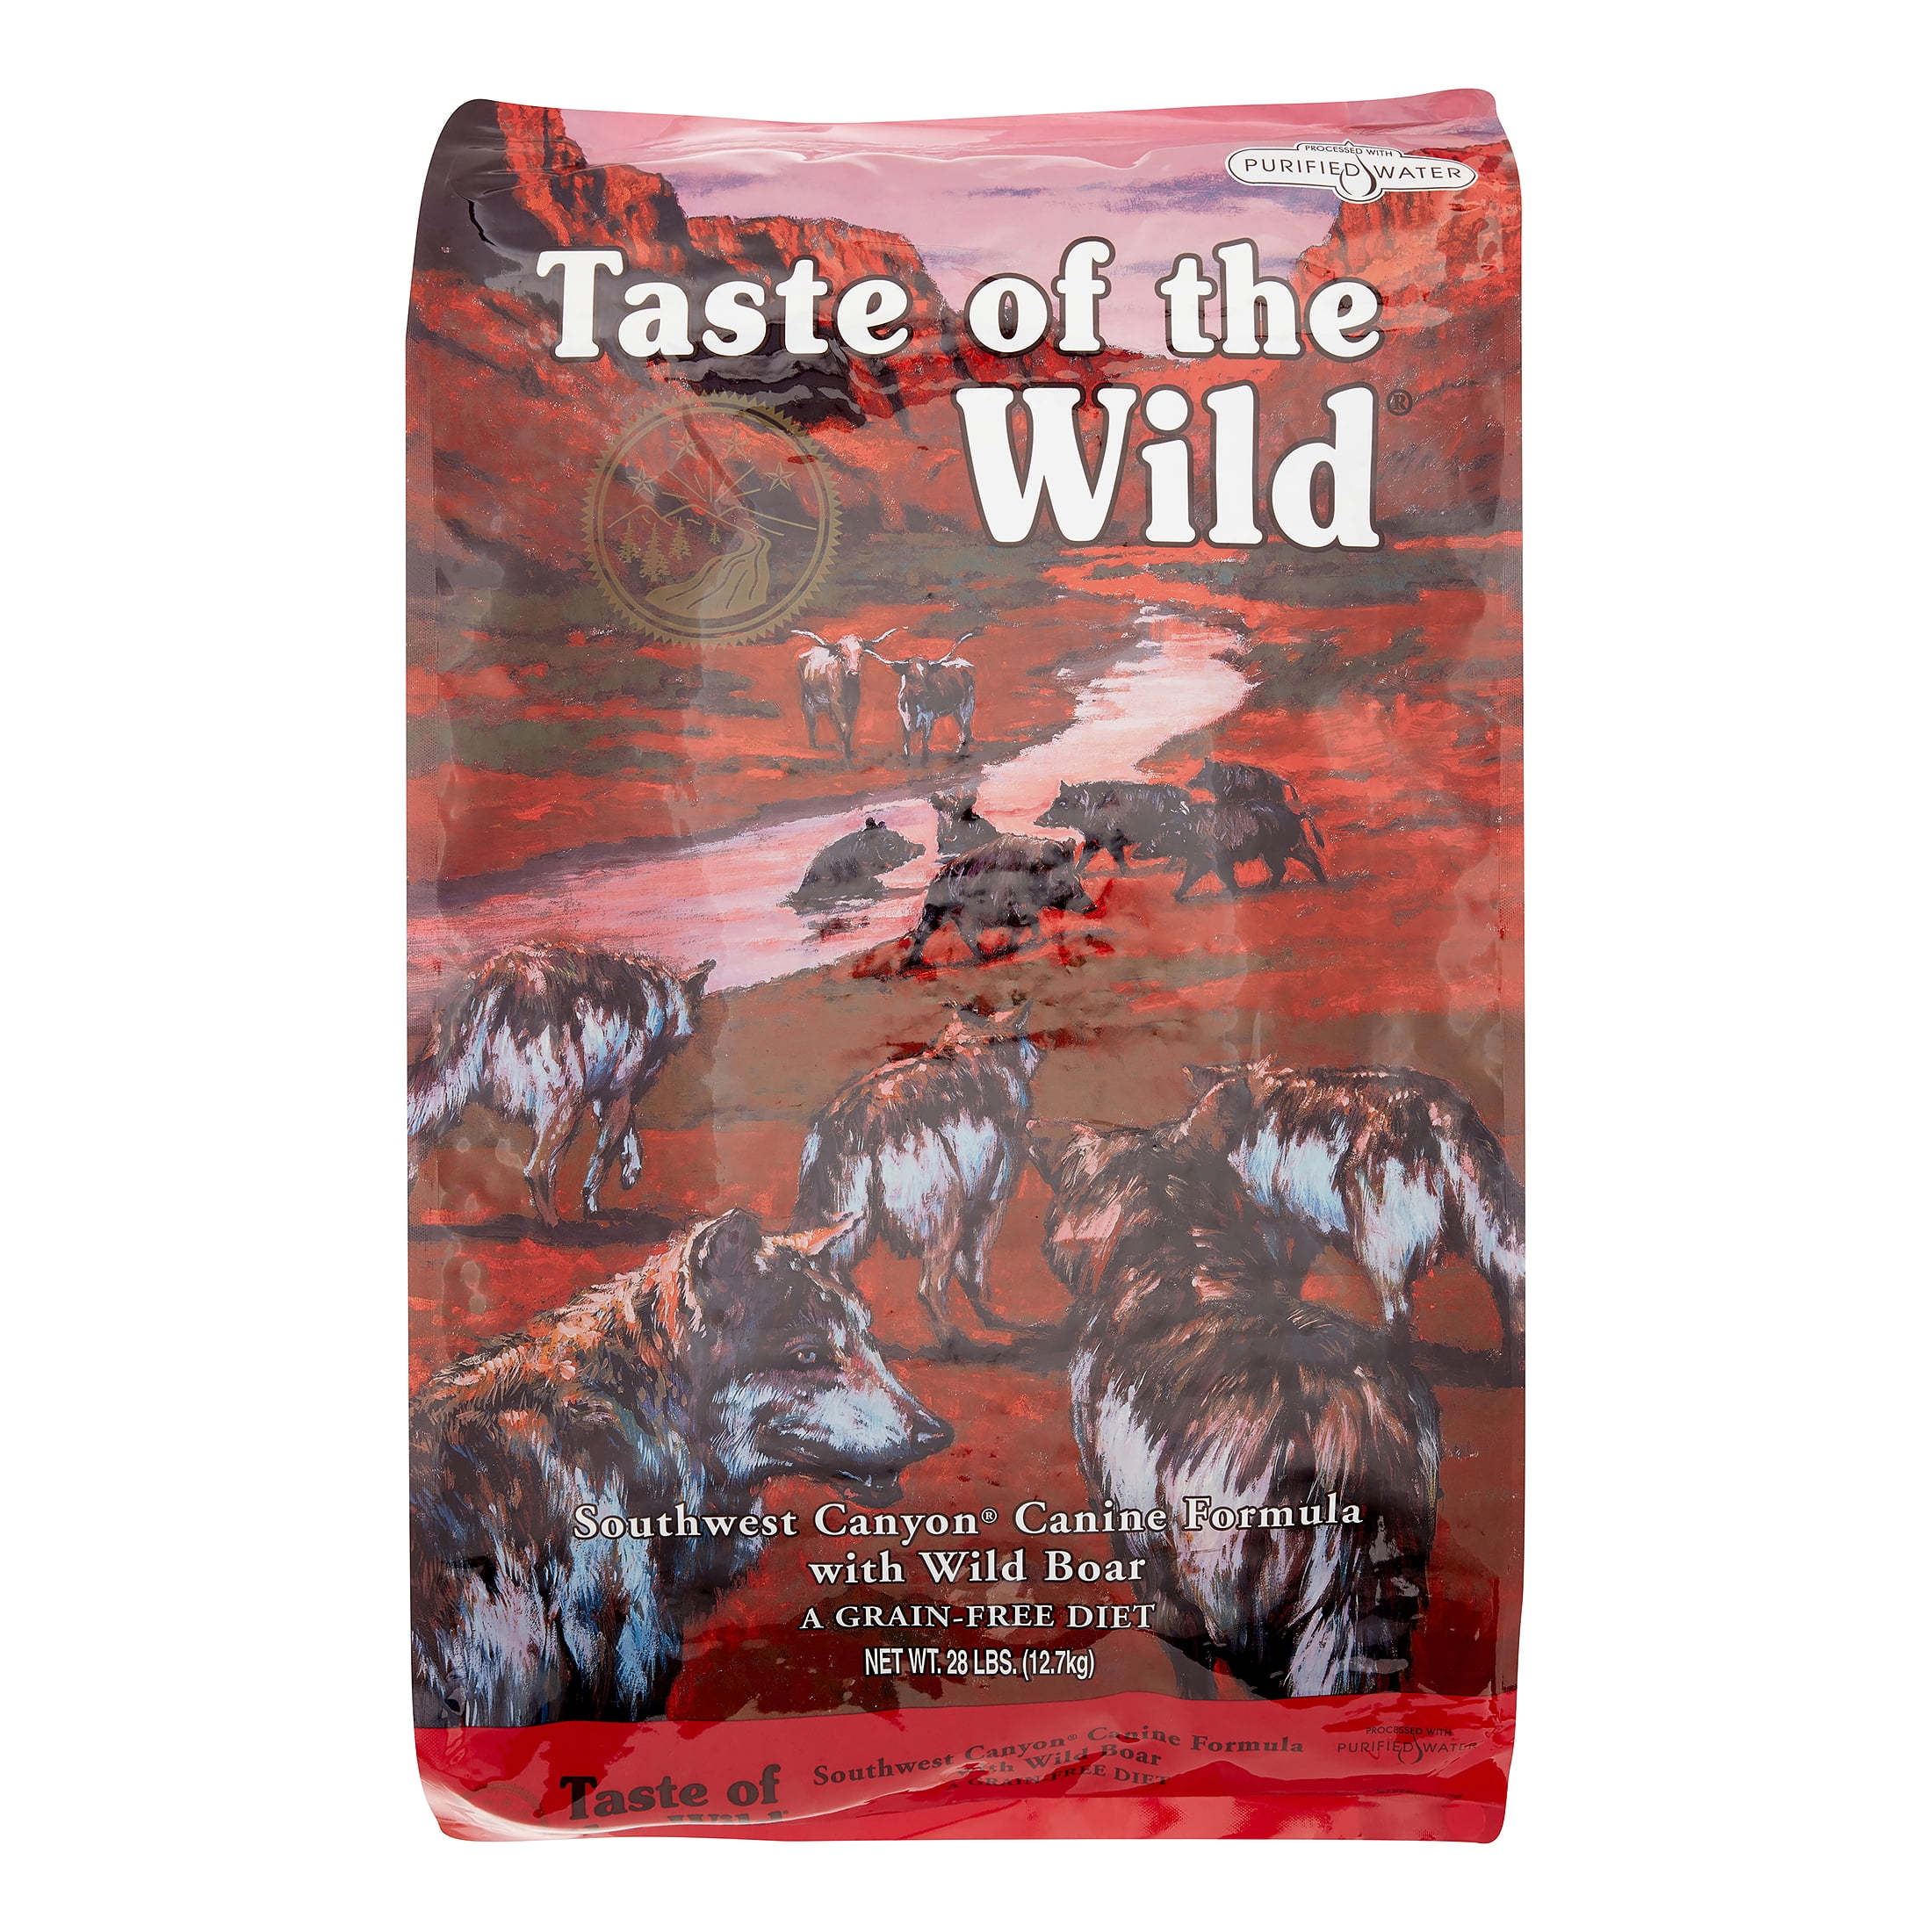 Taste of the Wild Southwest Canyon Grain-Free Dry Dog Food FREE SHIPPING